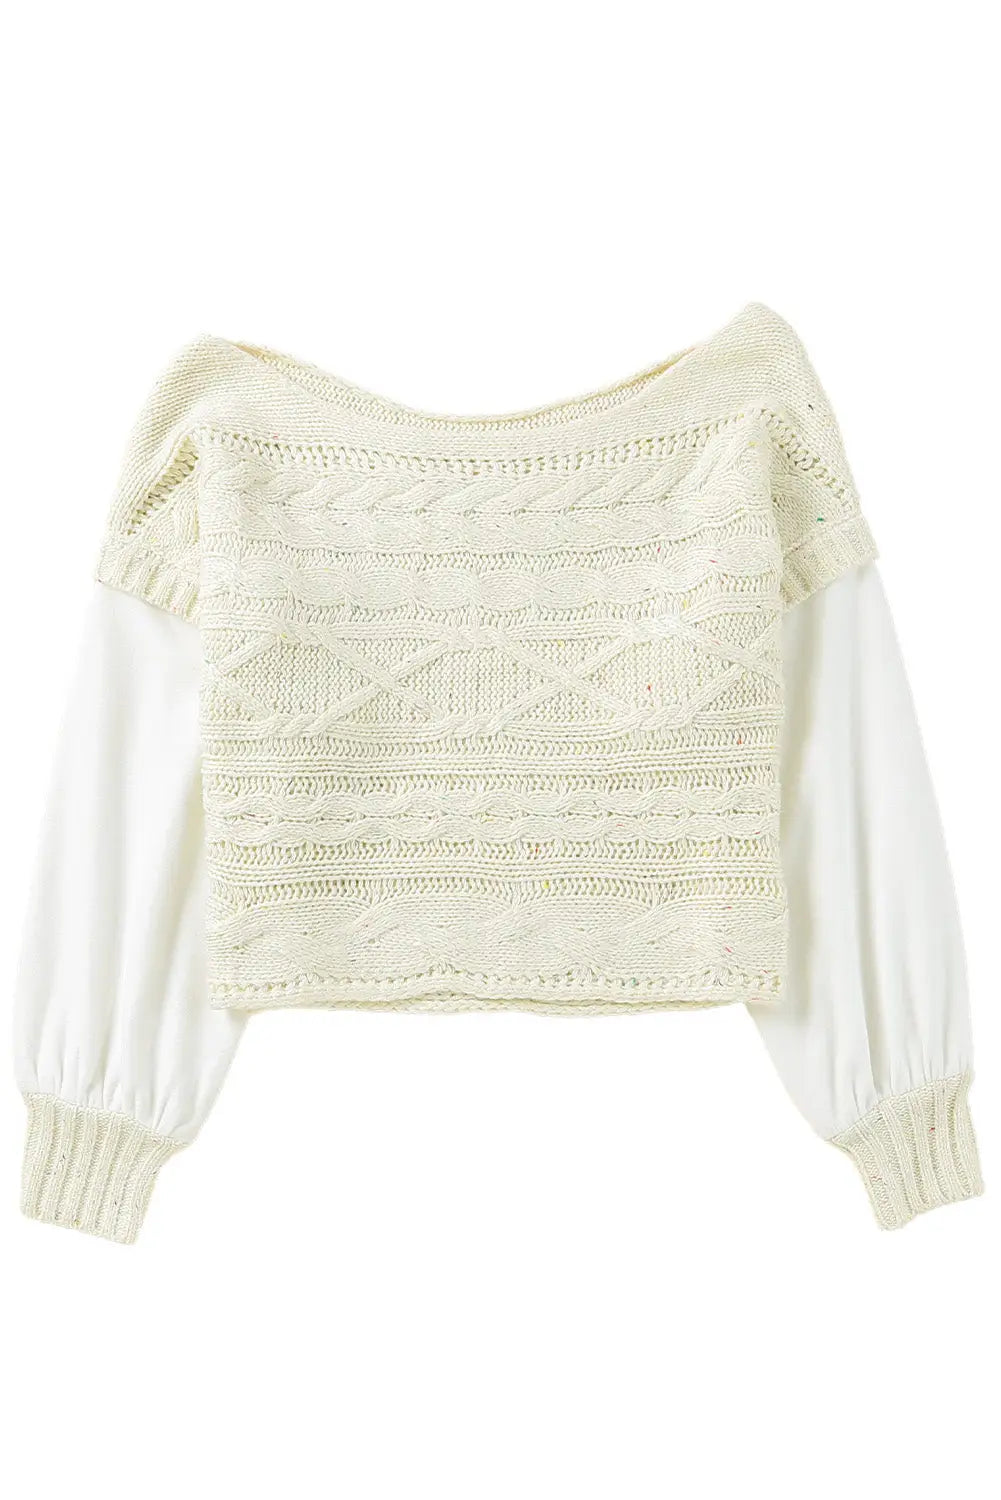 Apricot faux two-piece textured knit sweater - tops